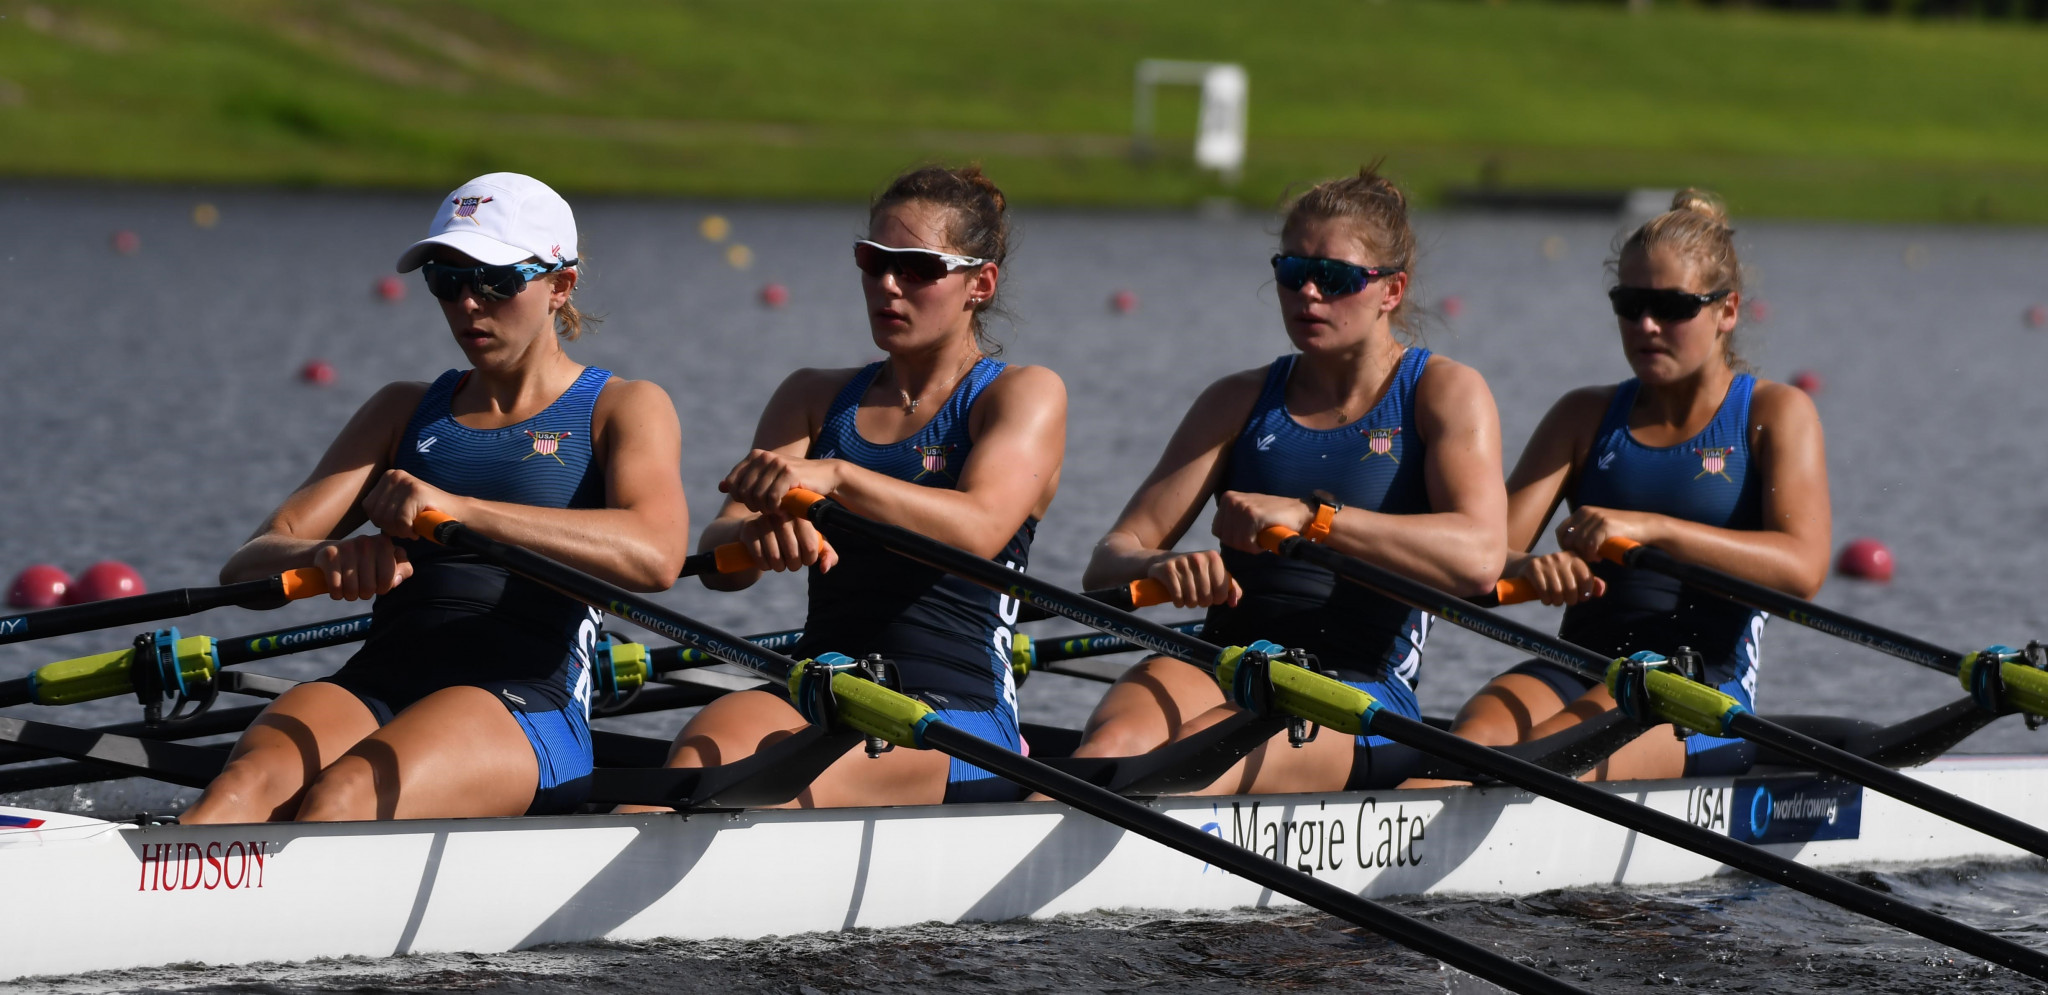 Competition began in Sarasota-Bradenton in humid conditions ©USRowing